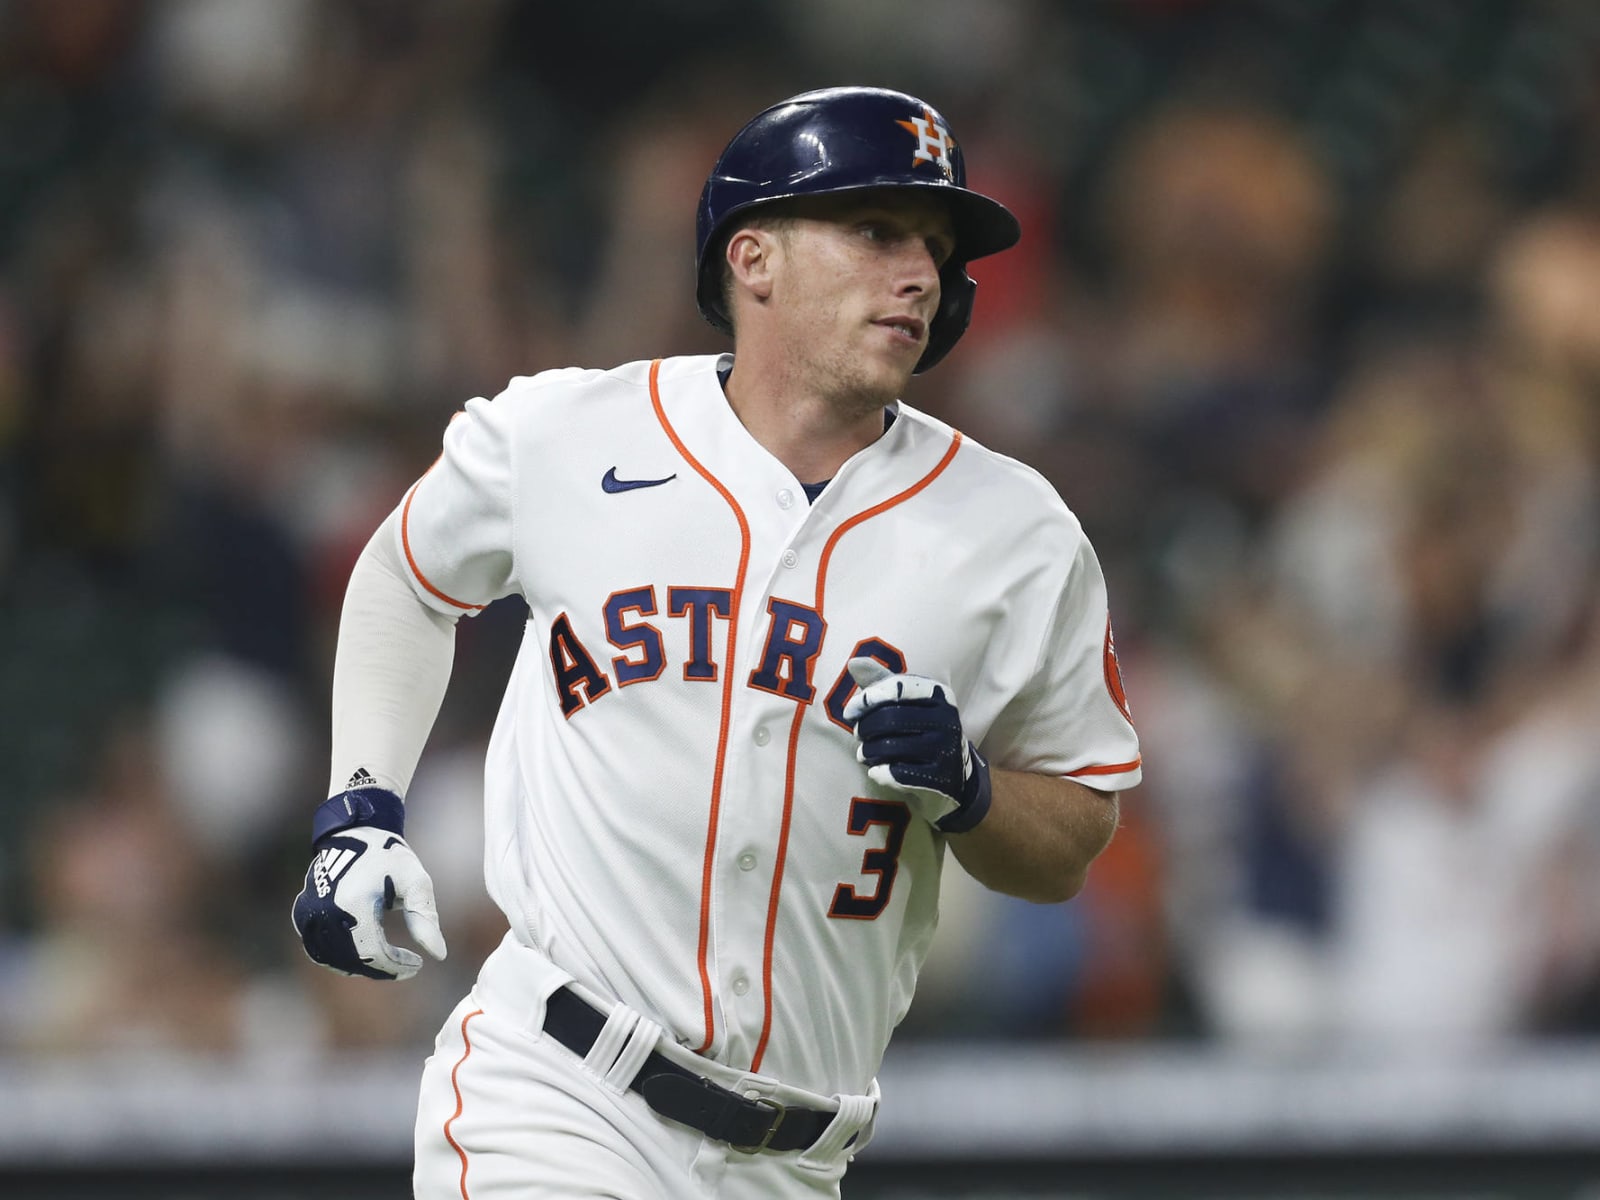 In their surprise trade of Myles Straw, the Astros make a big bet